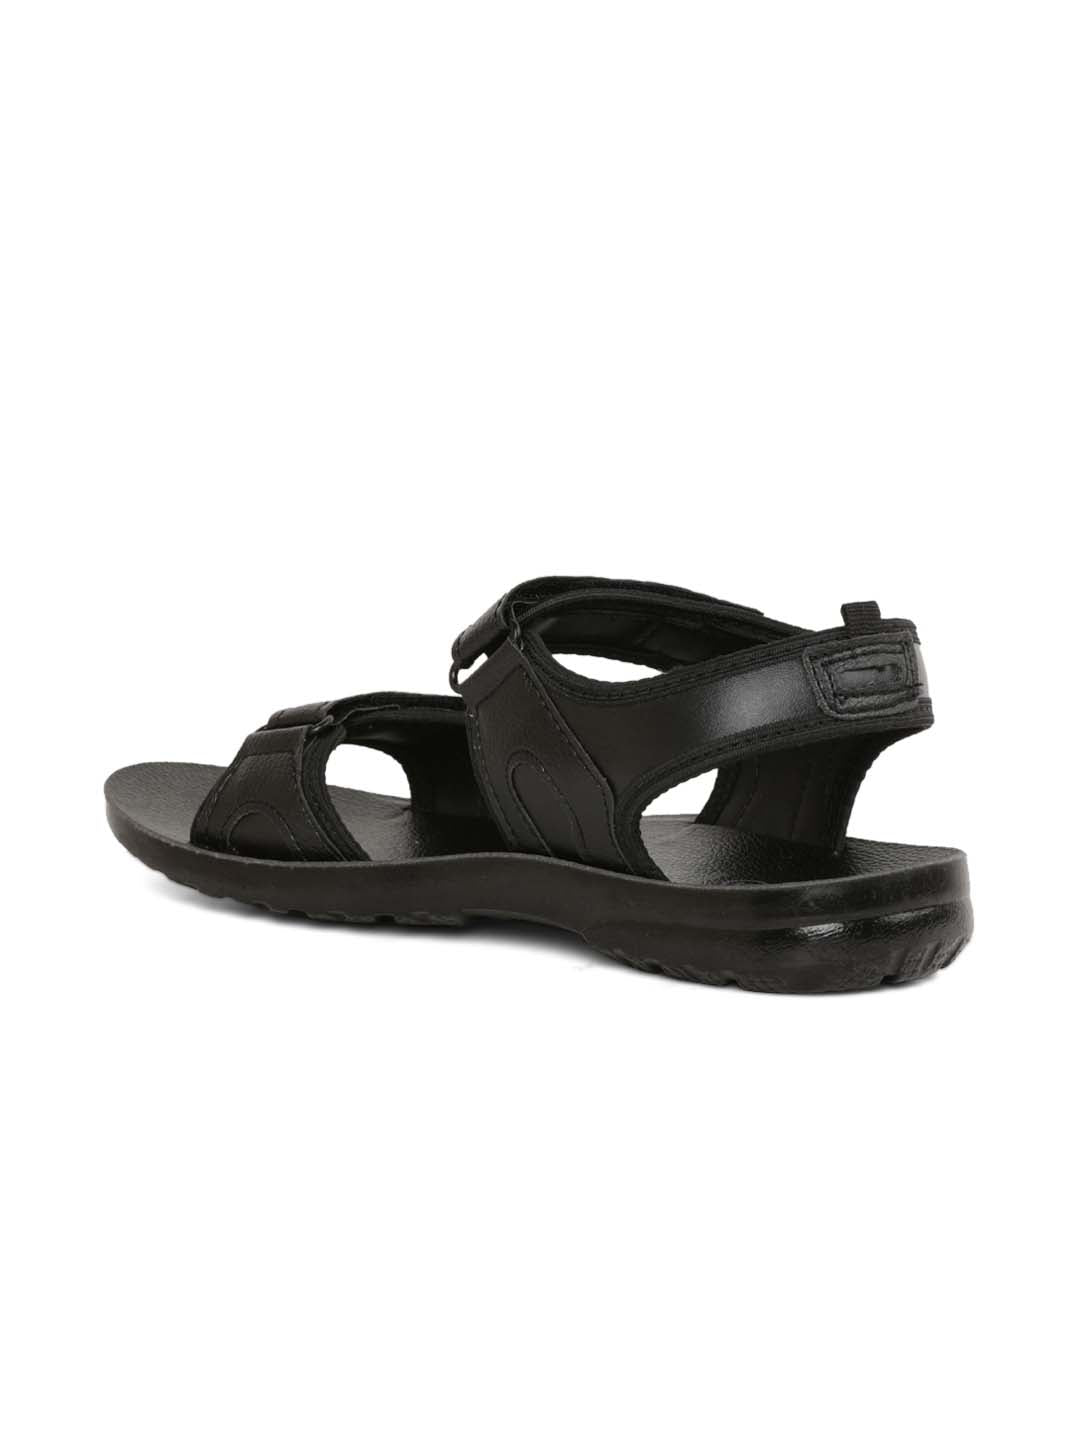 Paragon  PU8885B Kids Casual Fashion Sandals | Comfortable Flat Sandals | Trendy Outdoor Indoor Floaters for Boys &amp; Girls